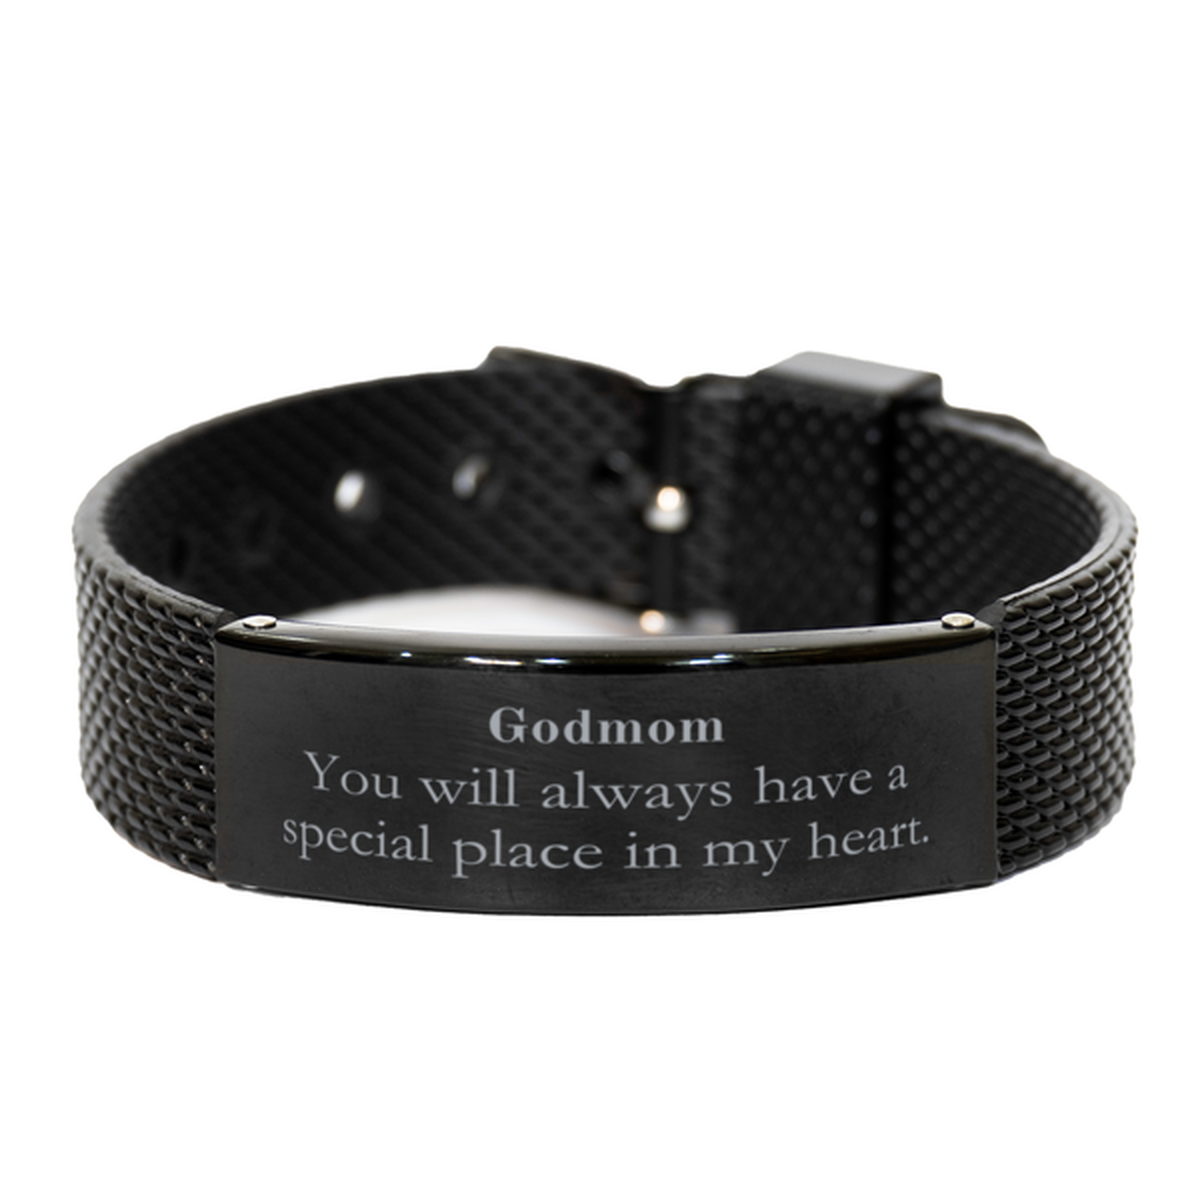 Godmom Special Place in My Heart Black Shark Mesh Bracelet Inspirational Gift for Birthday, Christmas, Graduation, and Veterans Day